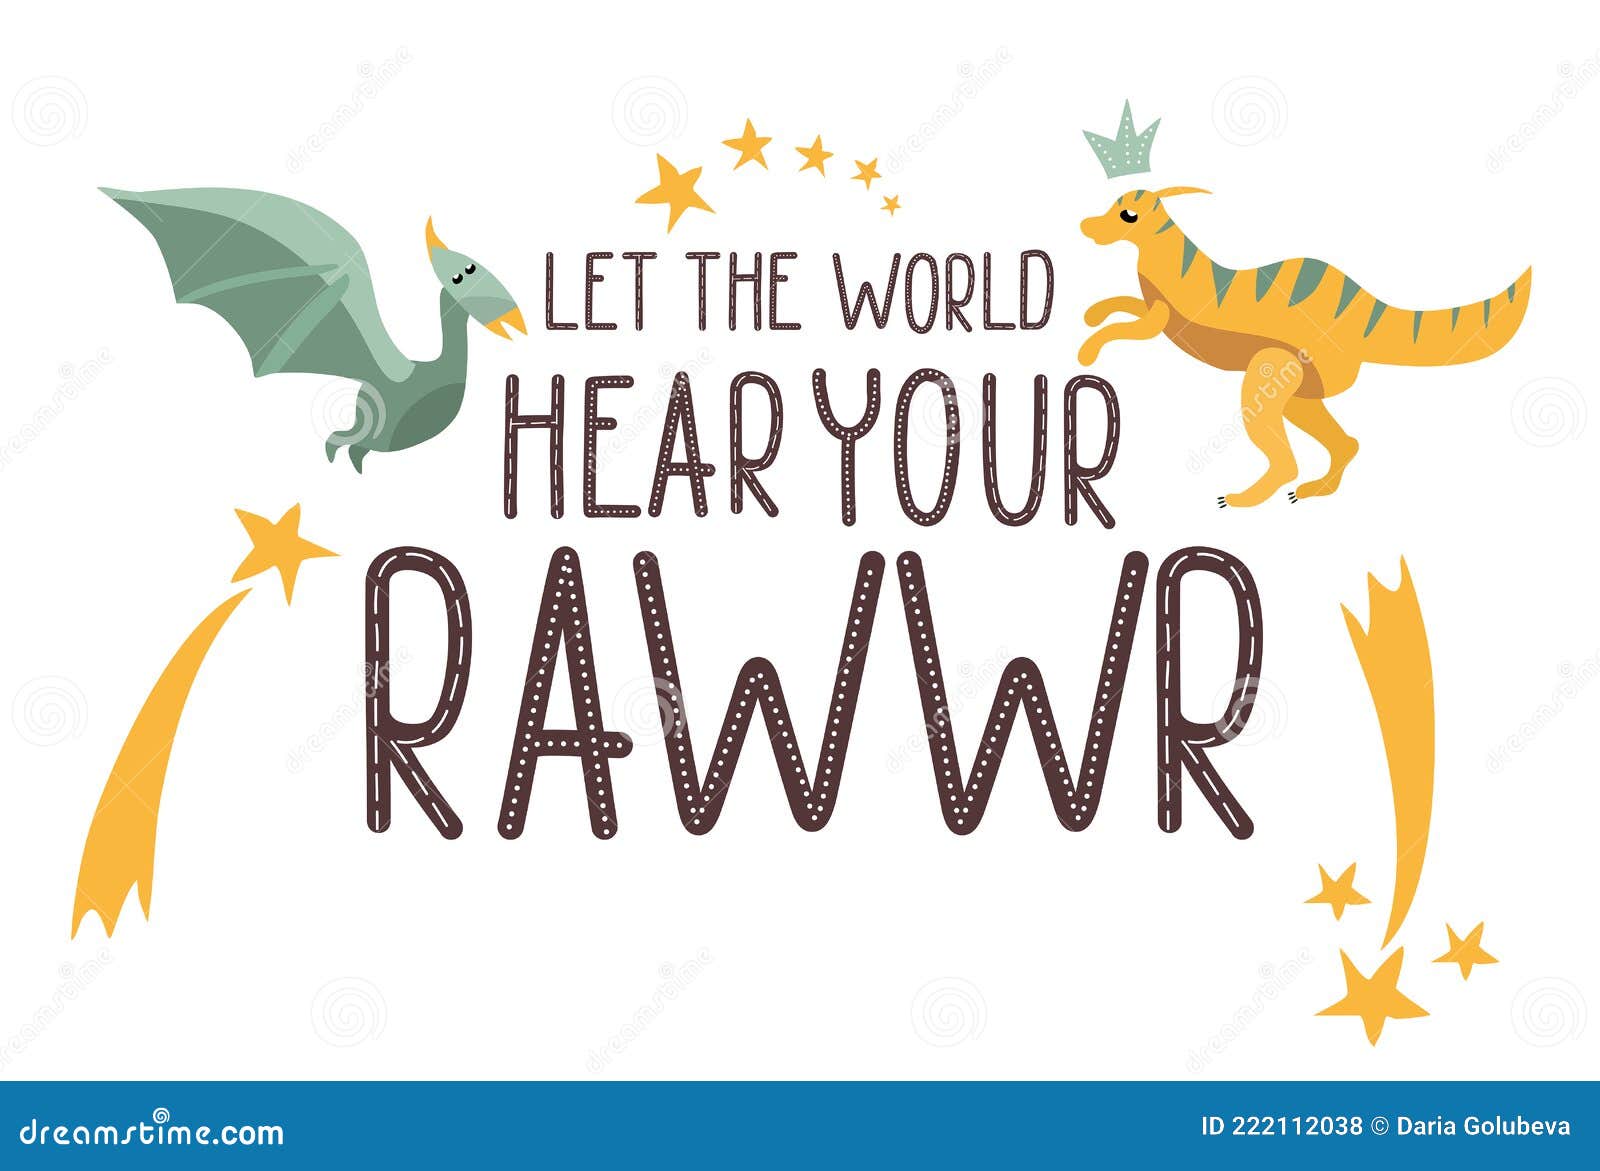 You're Roarsome: Uplifting Quotes and Roarful Dinosaur Puns to Rock Your  World